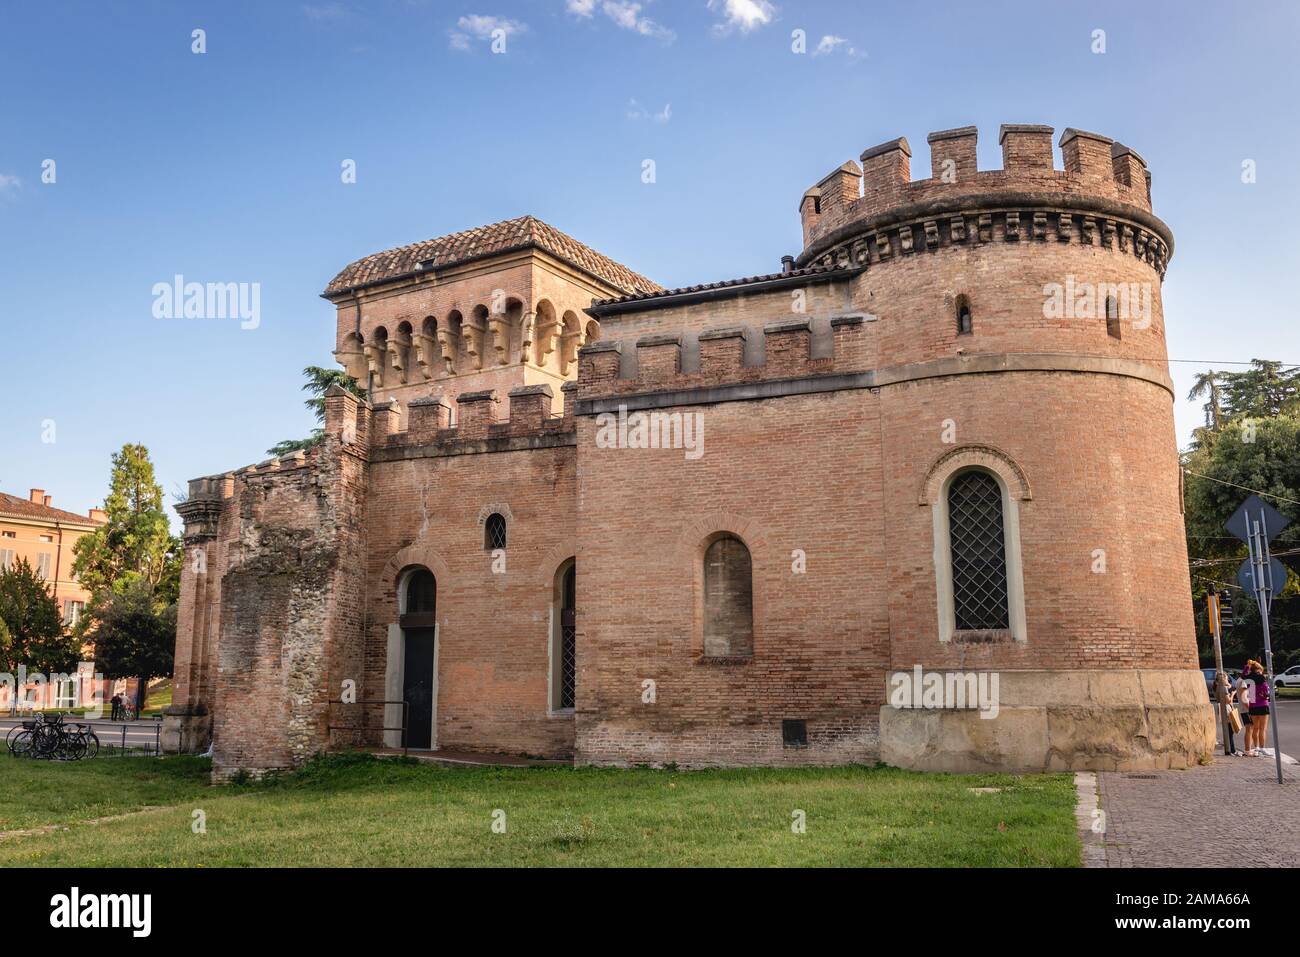 Porta Saragozza, one of the twelve gates of the ancient walls of Bologna, capital and largest city of the Emilia Romagna region in Northern Italy Stock Photo